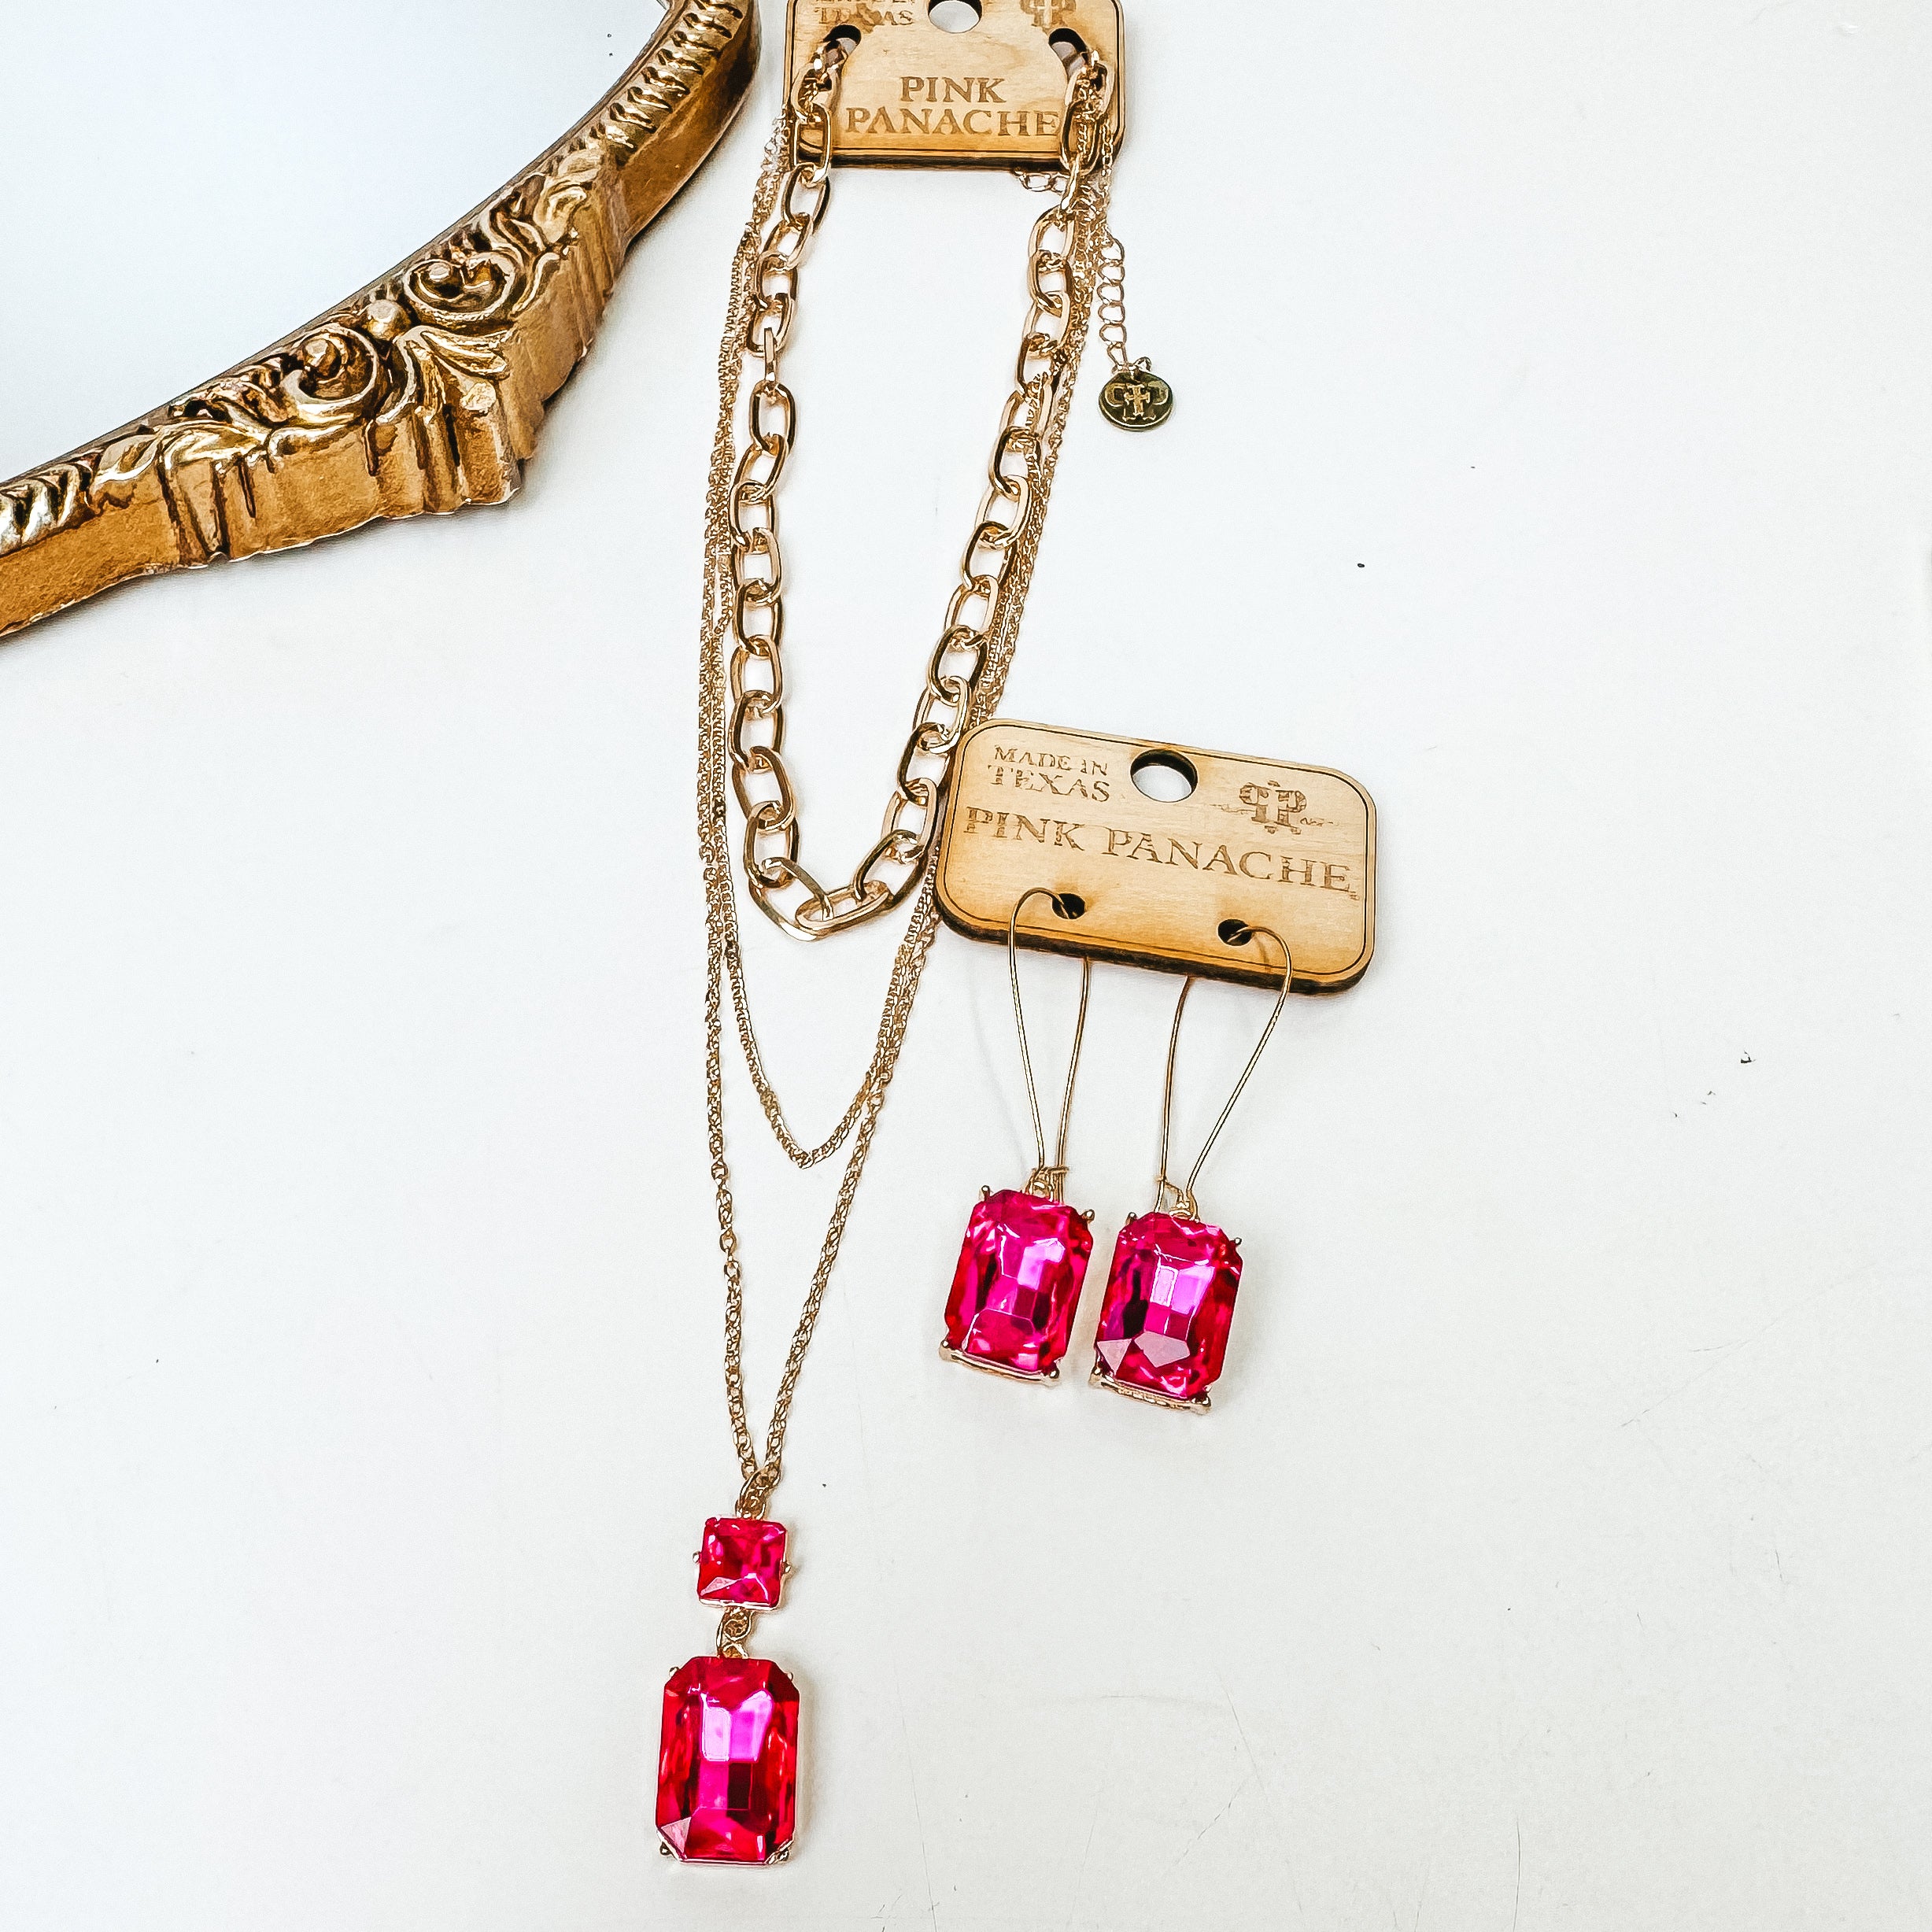 Pink Panache | Gold Tone Kidney Wire Earrings with Fuchsia Rectangle Crystal Charm - Giddy Up Glamour Boutique